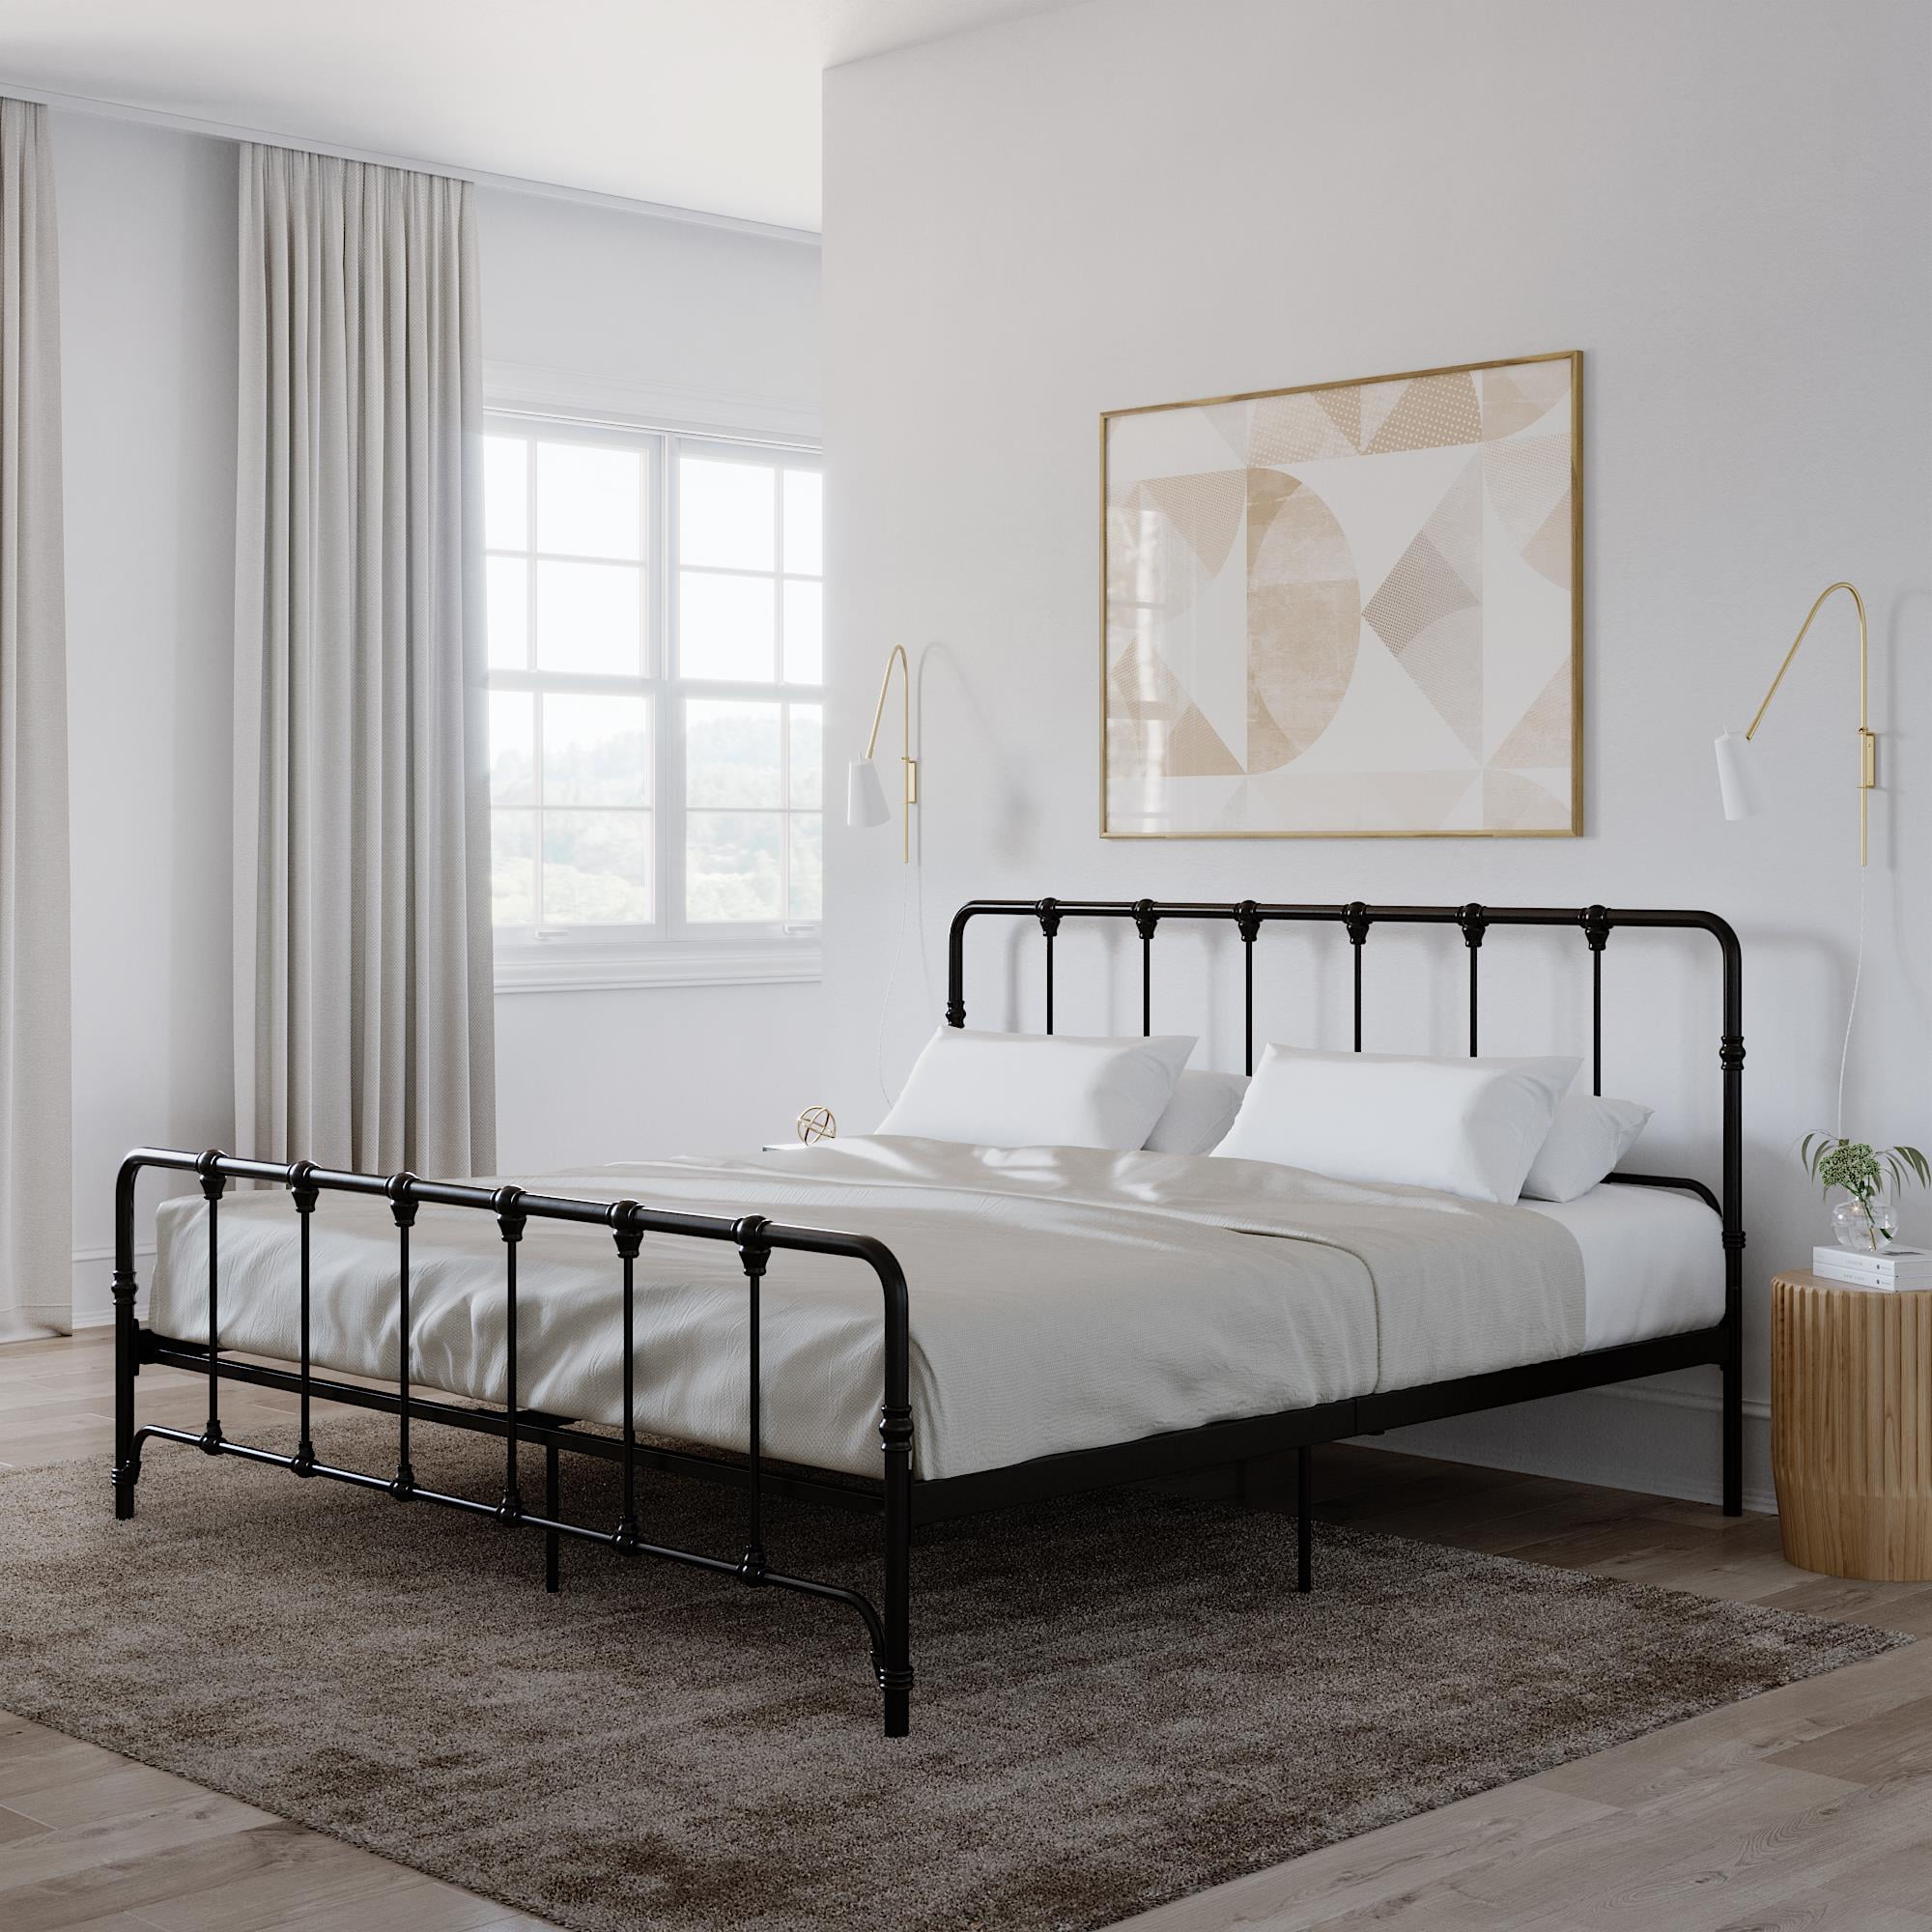 Mainstays Farmhouse Metal Bed King, What Is The Length Of A King Bed Frame